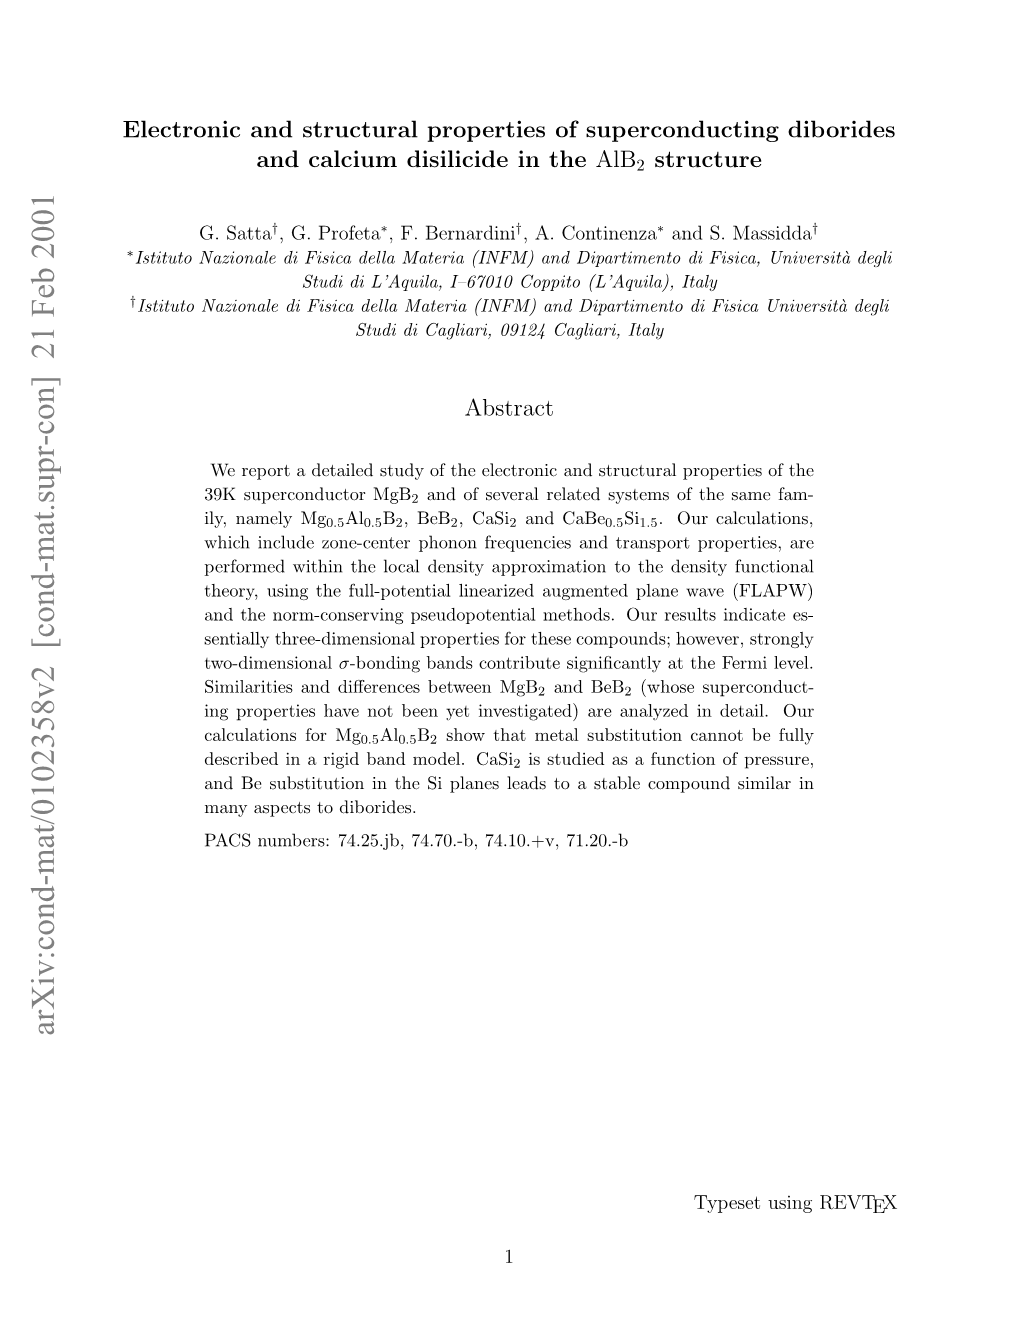 Electronic and Structural Properties of Superconducting Diborides And